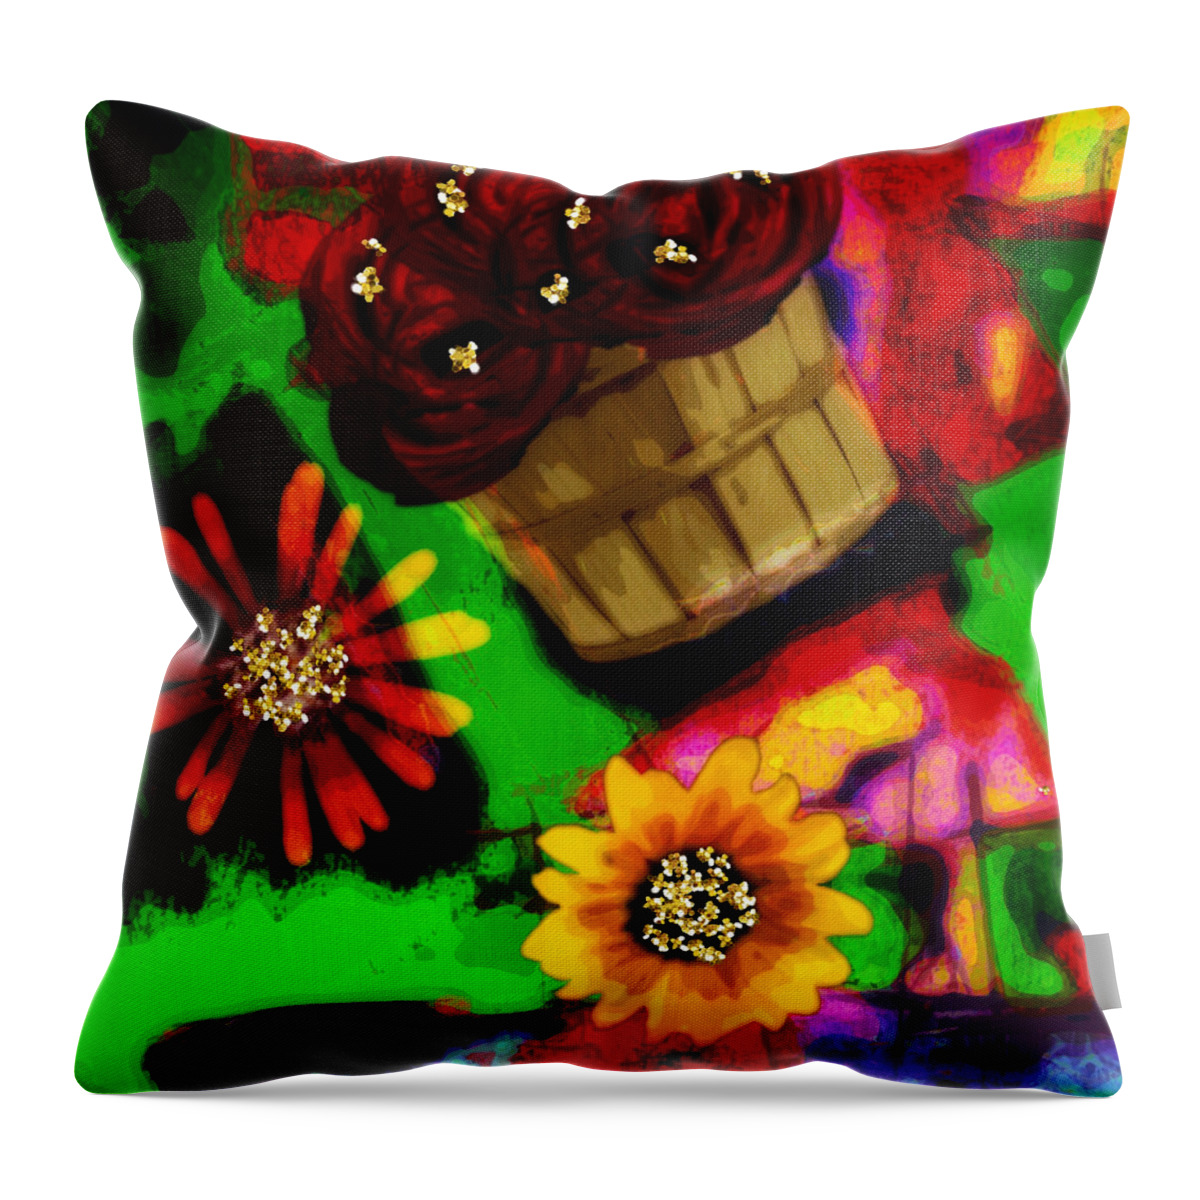 Abstract Art Throw Pillow featuring the mixed media Flower Power by Canessa Thomas